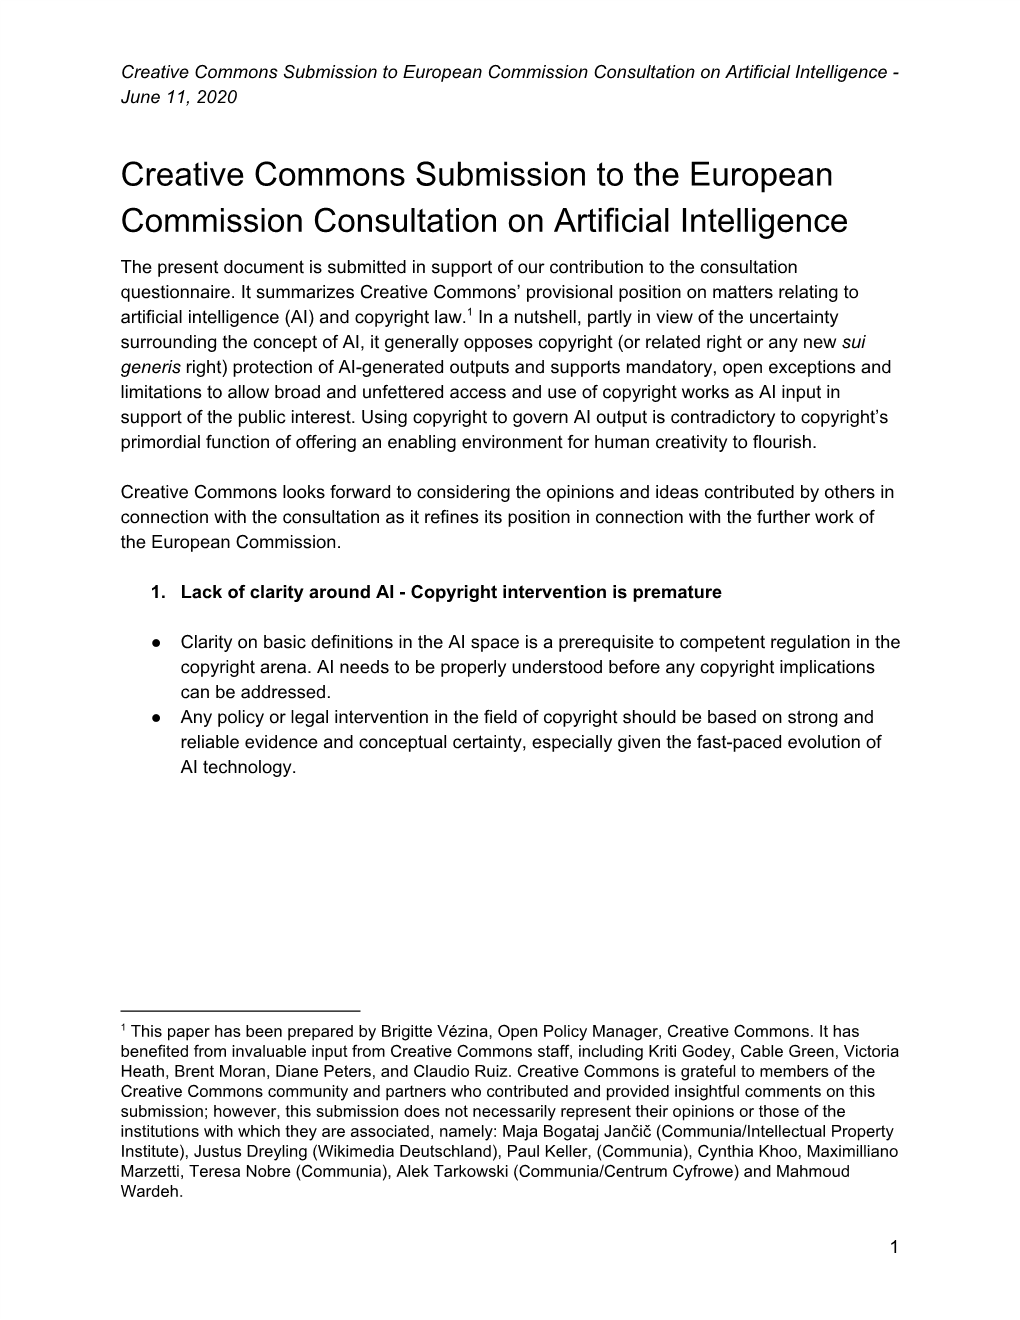 Creative Commons Submission to the European Commission Consultation on Artificial Intelligence